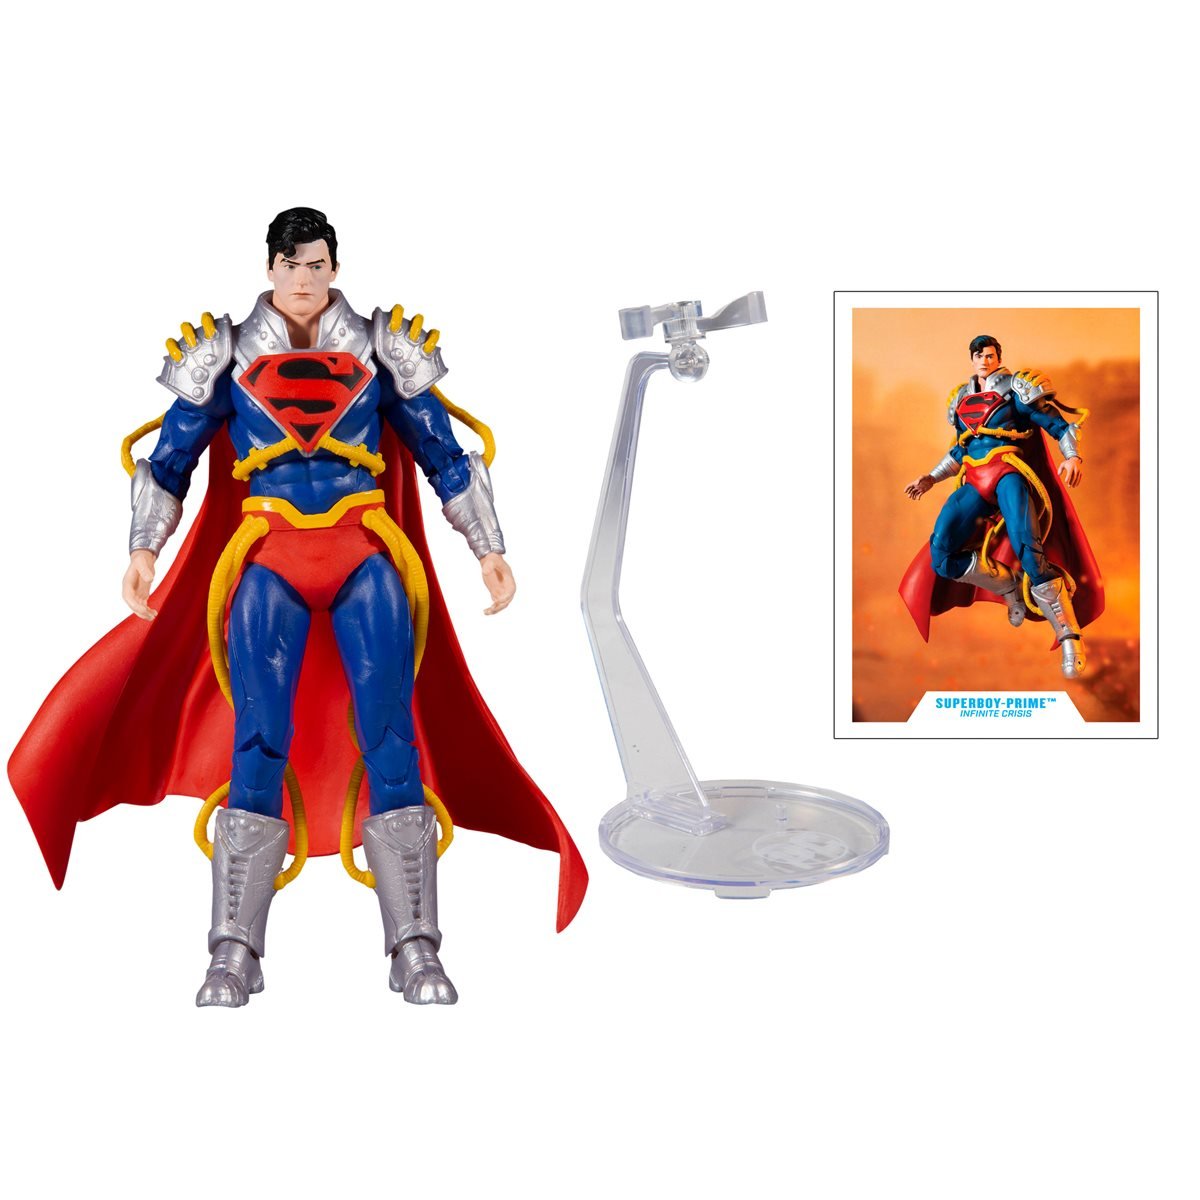 Get Your DC Multiverse Superboy Prime Infinite Crisis 7-Inch Scale Action Figure